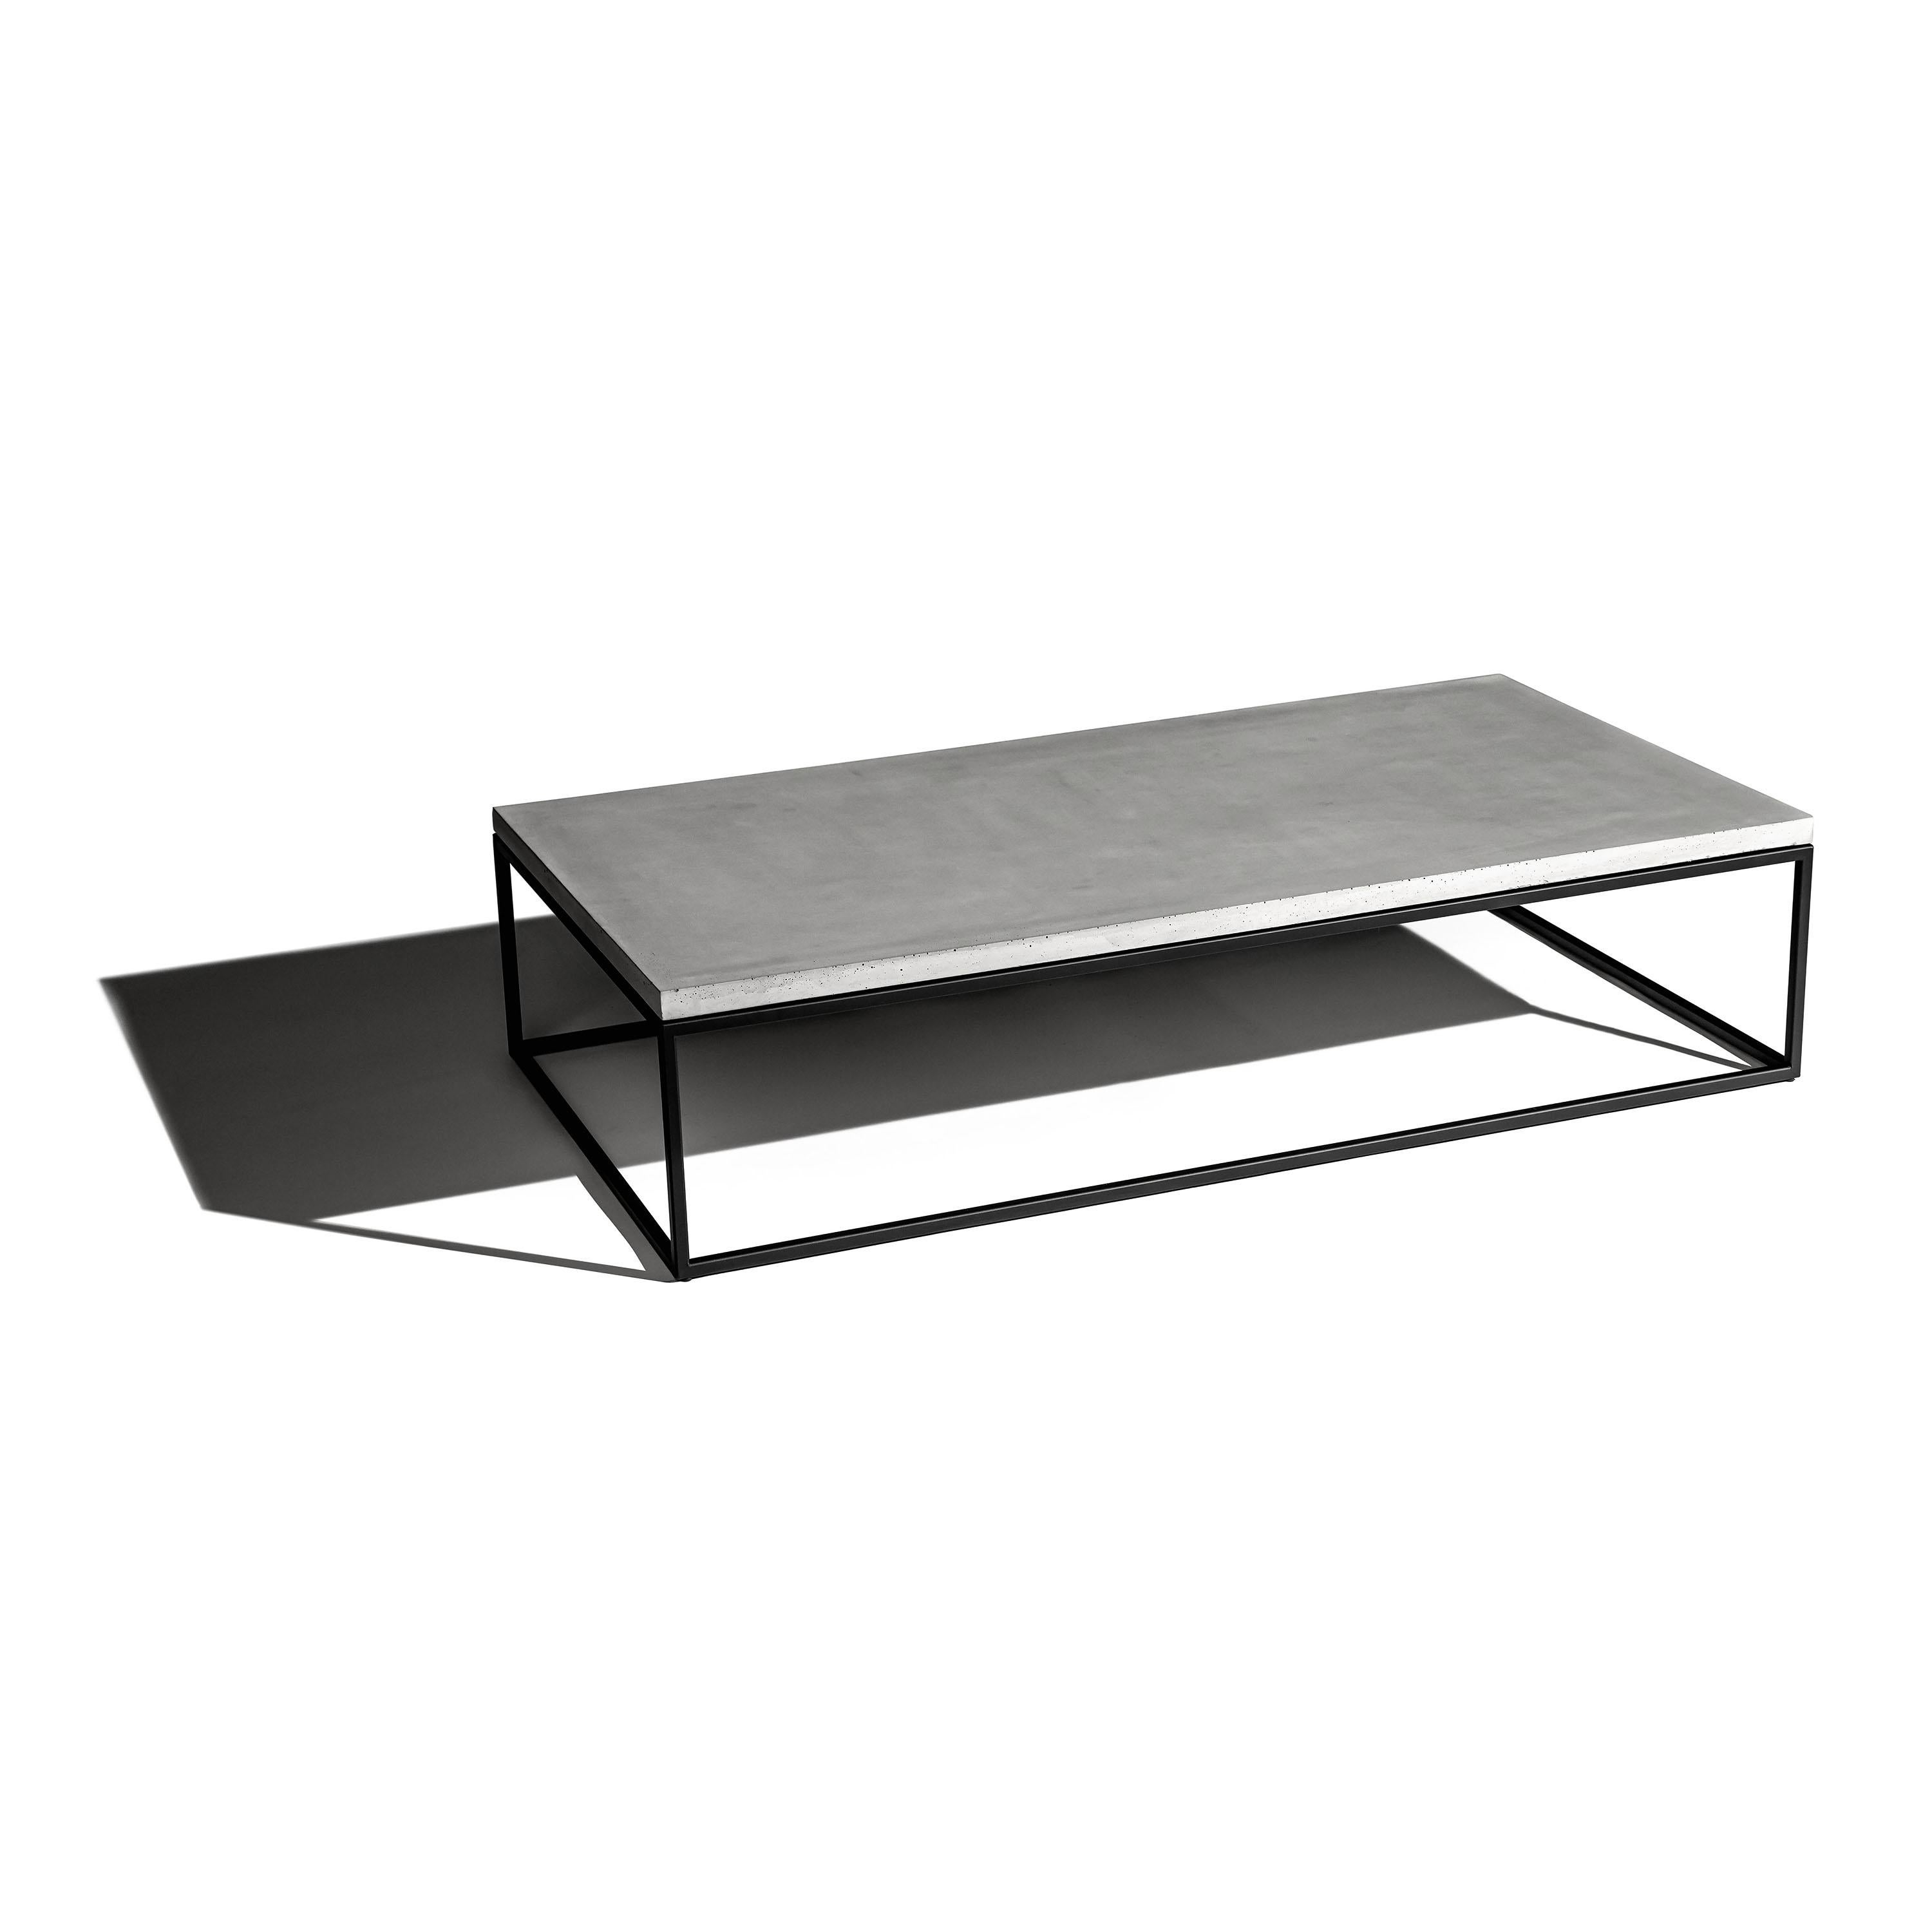 French Perspective 1300x700 Coffee Table Black For Sale